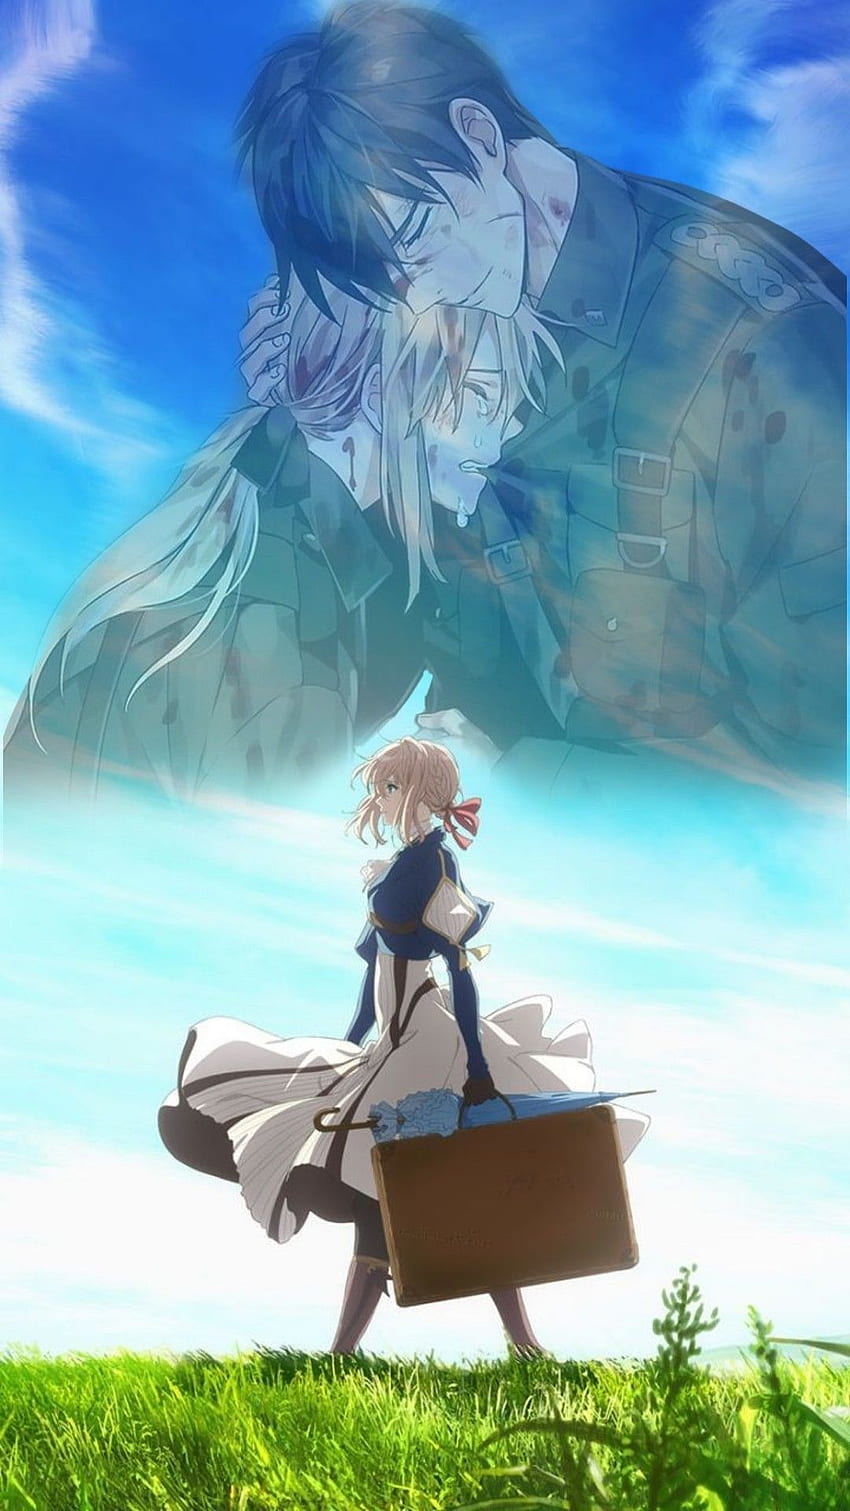 Violet Evergarden and the Salvation of Anime | J-List Blog